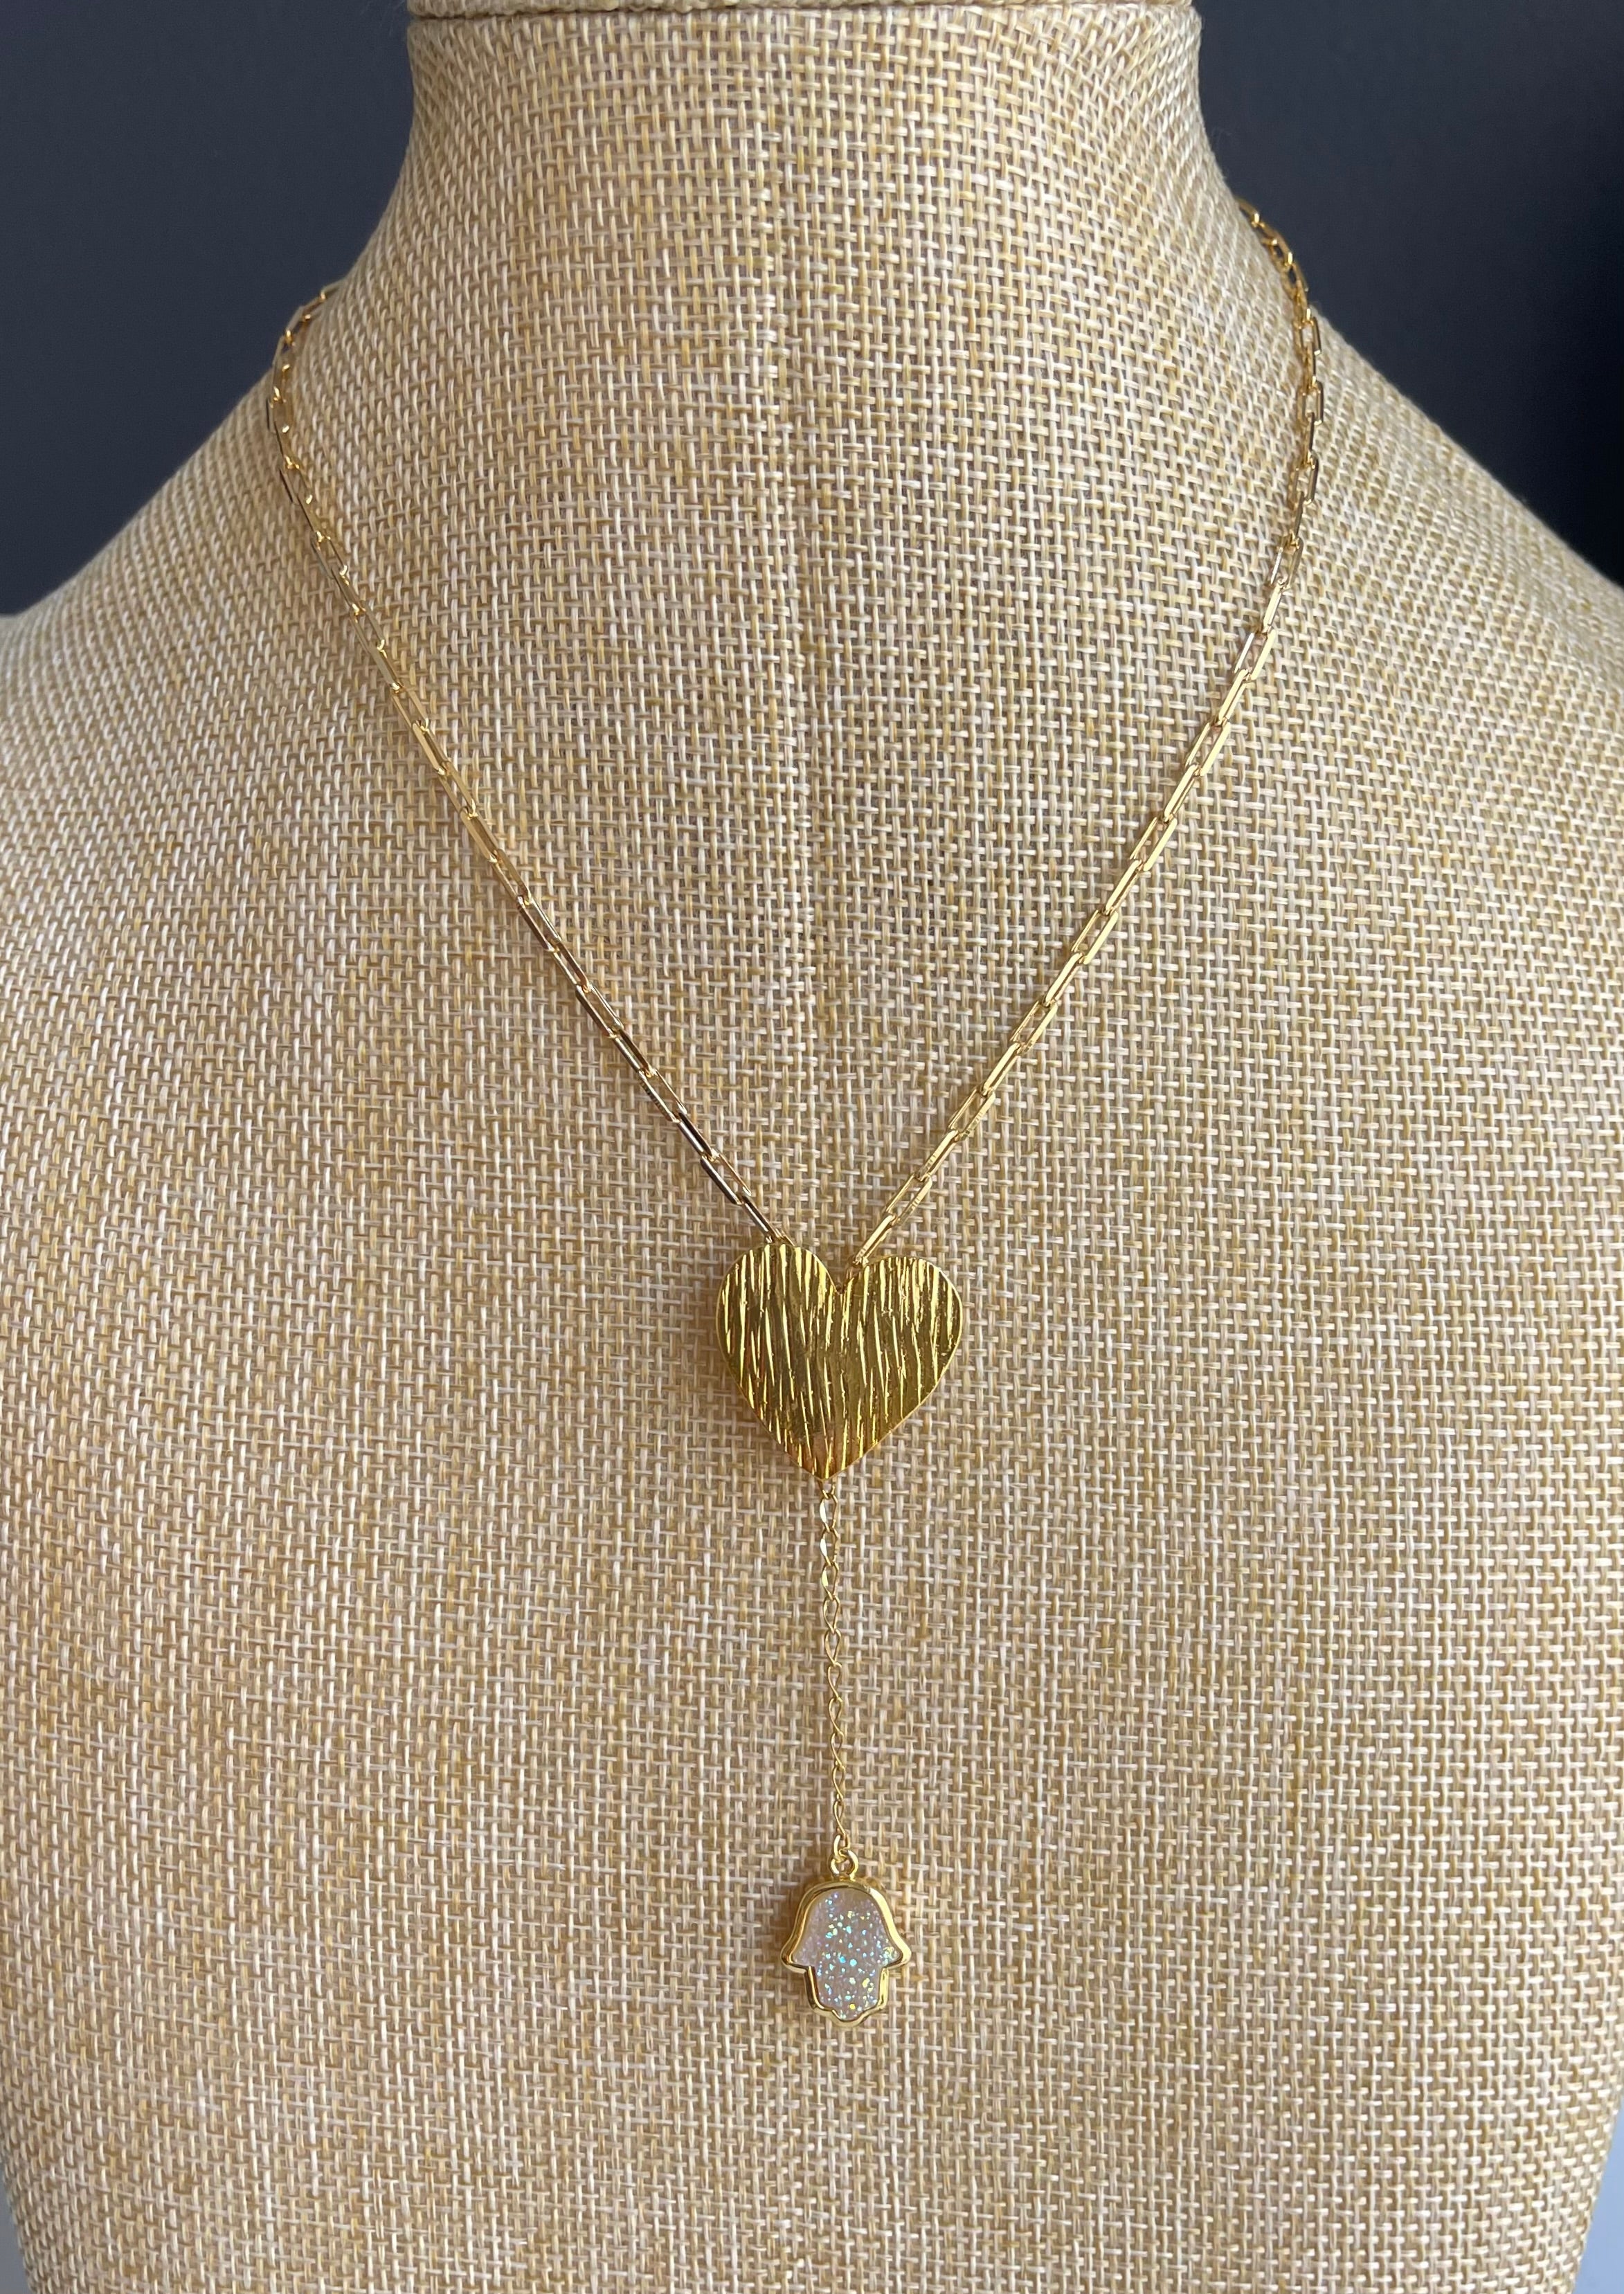 Gold Filled Necklace Heart and Hamsa Hand